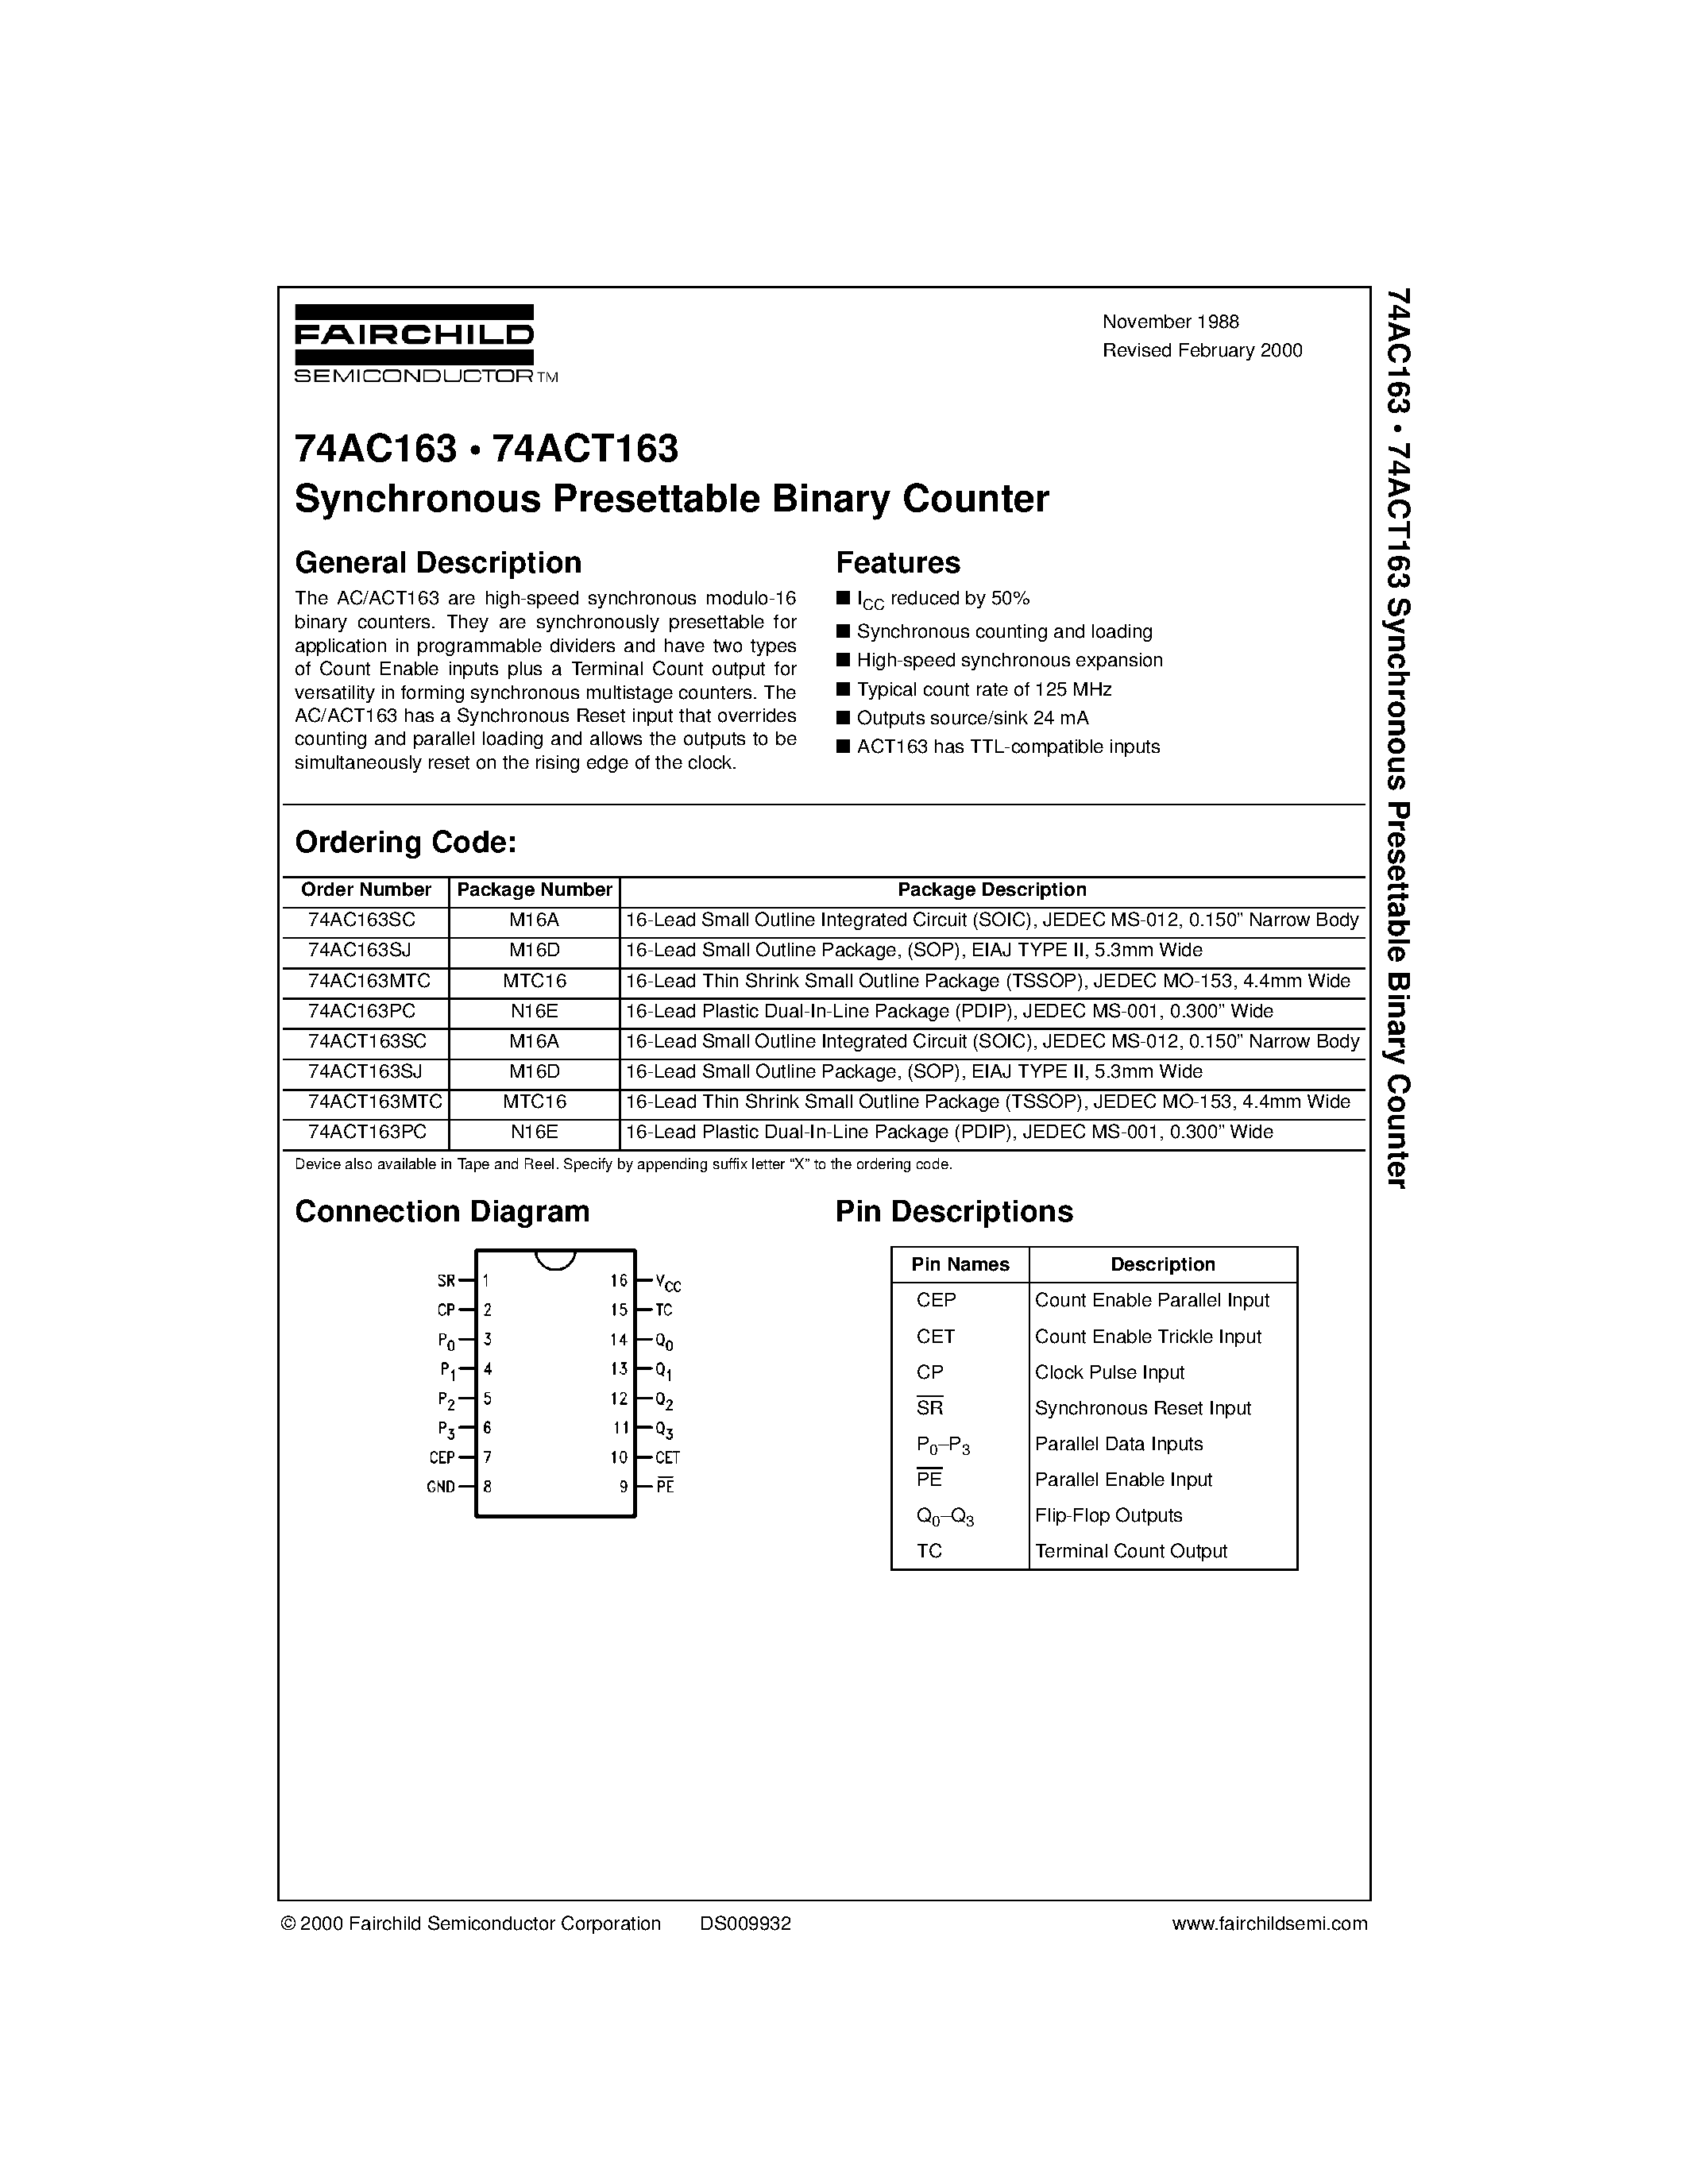 Datasheet 74AC163MTC - Synchronous Presettable Binary Counter page 1